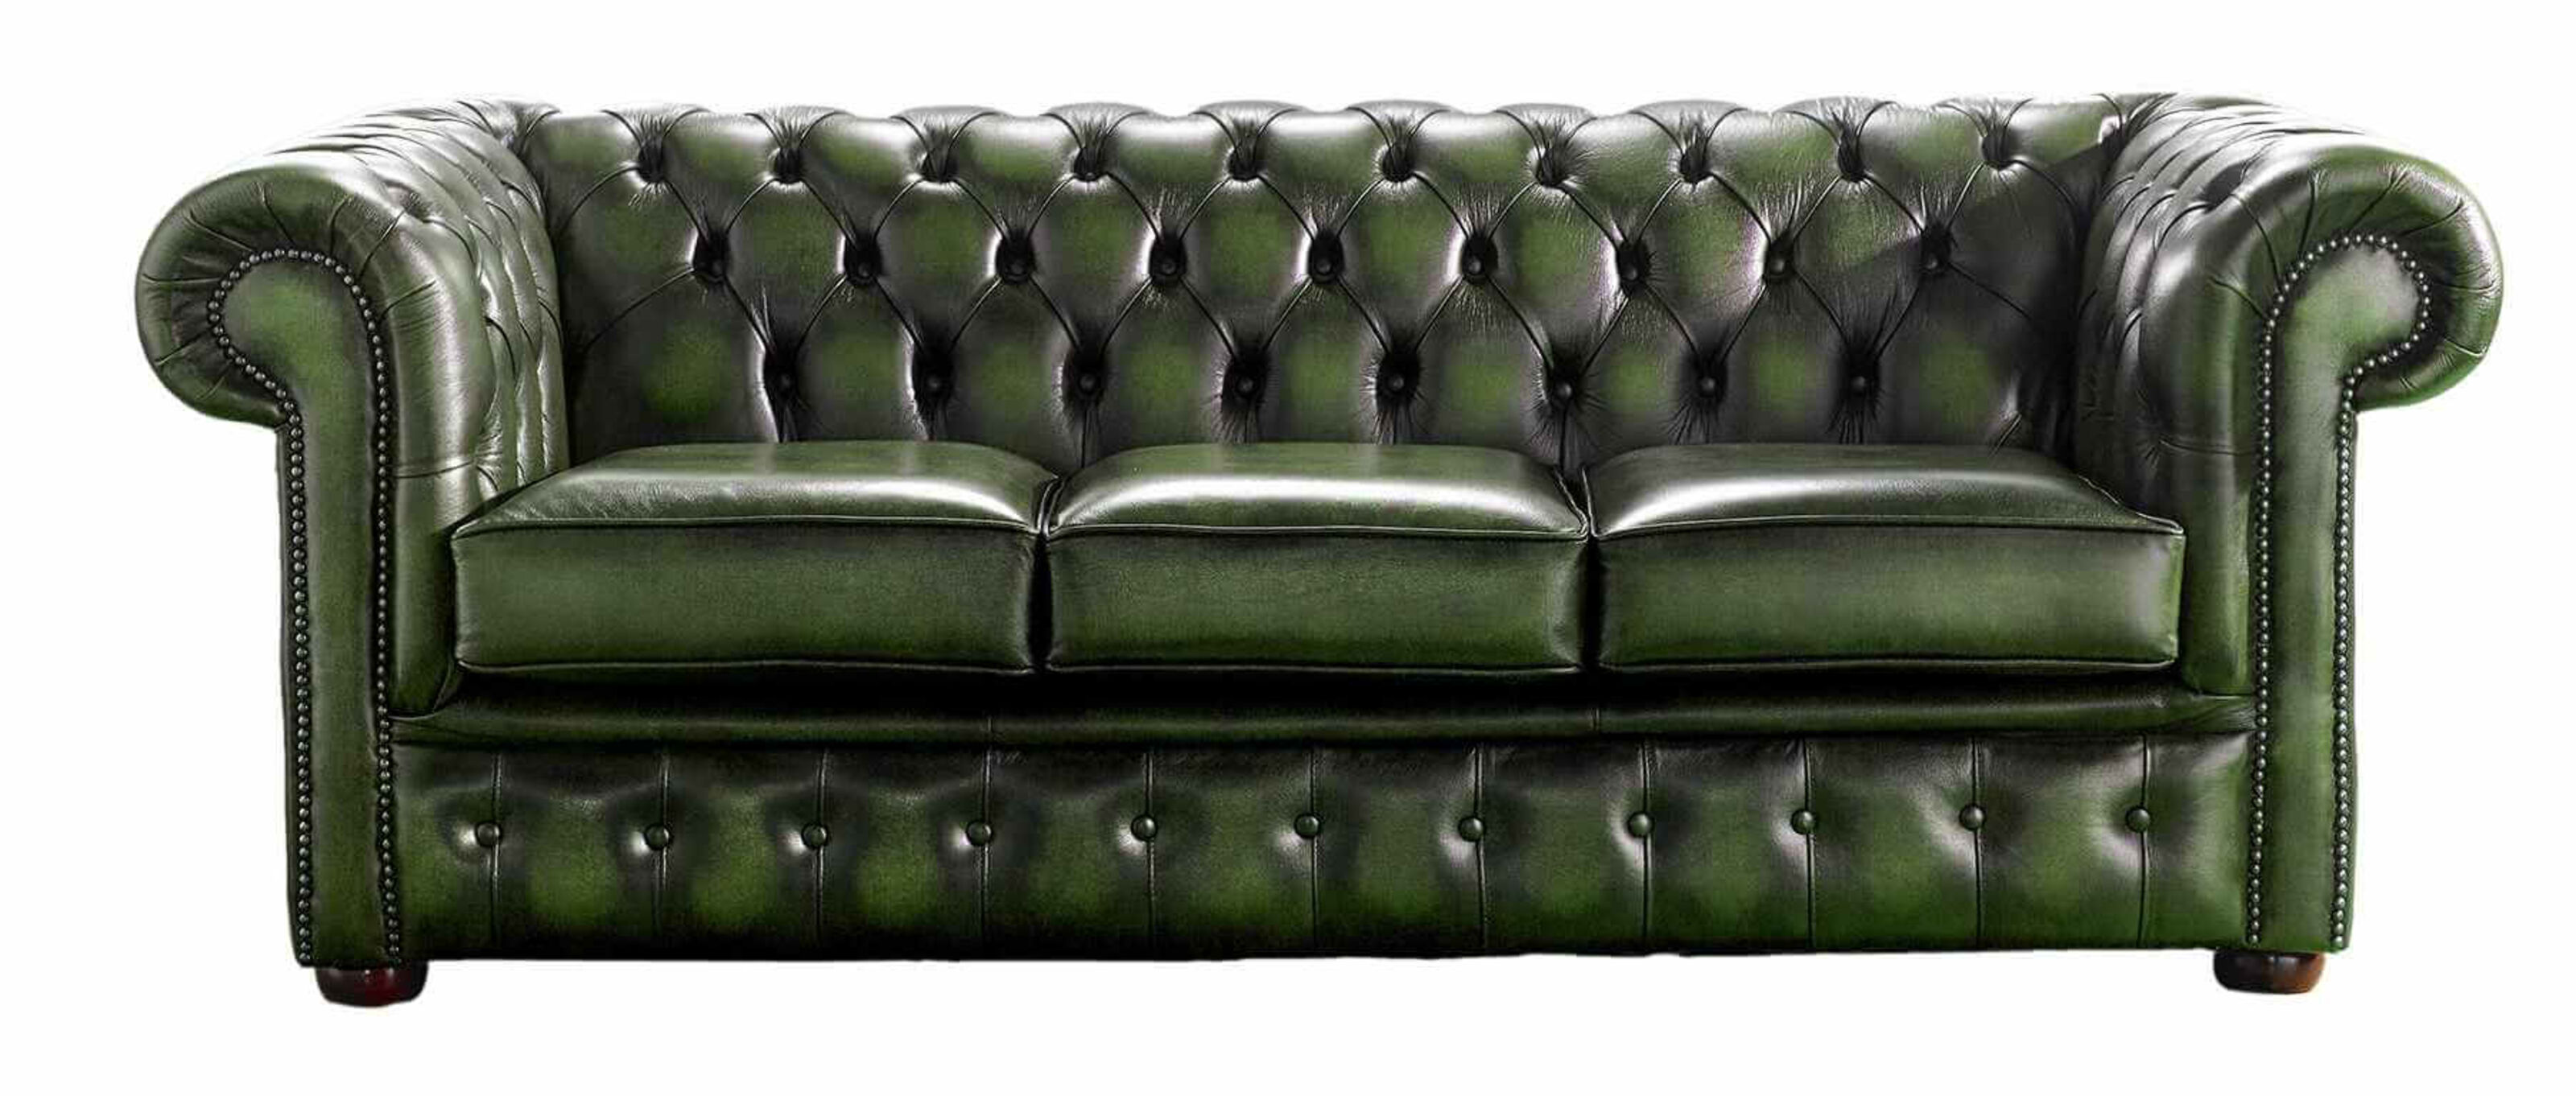 Wing Chairs: The Epitome of Elegance and Style  %Post Title